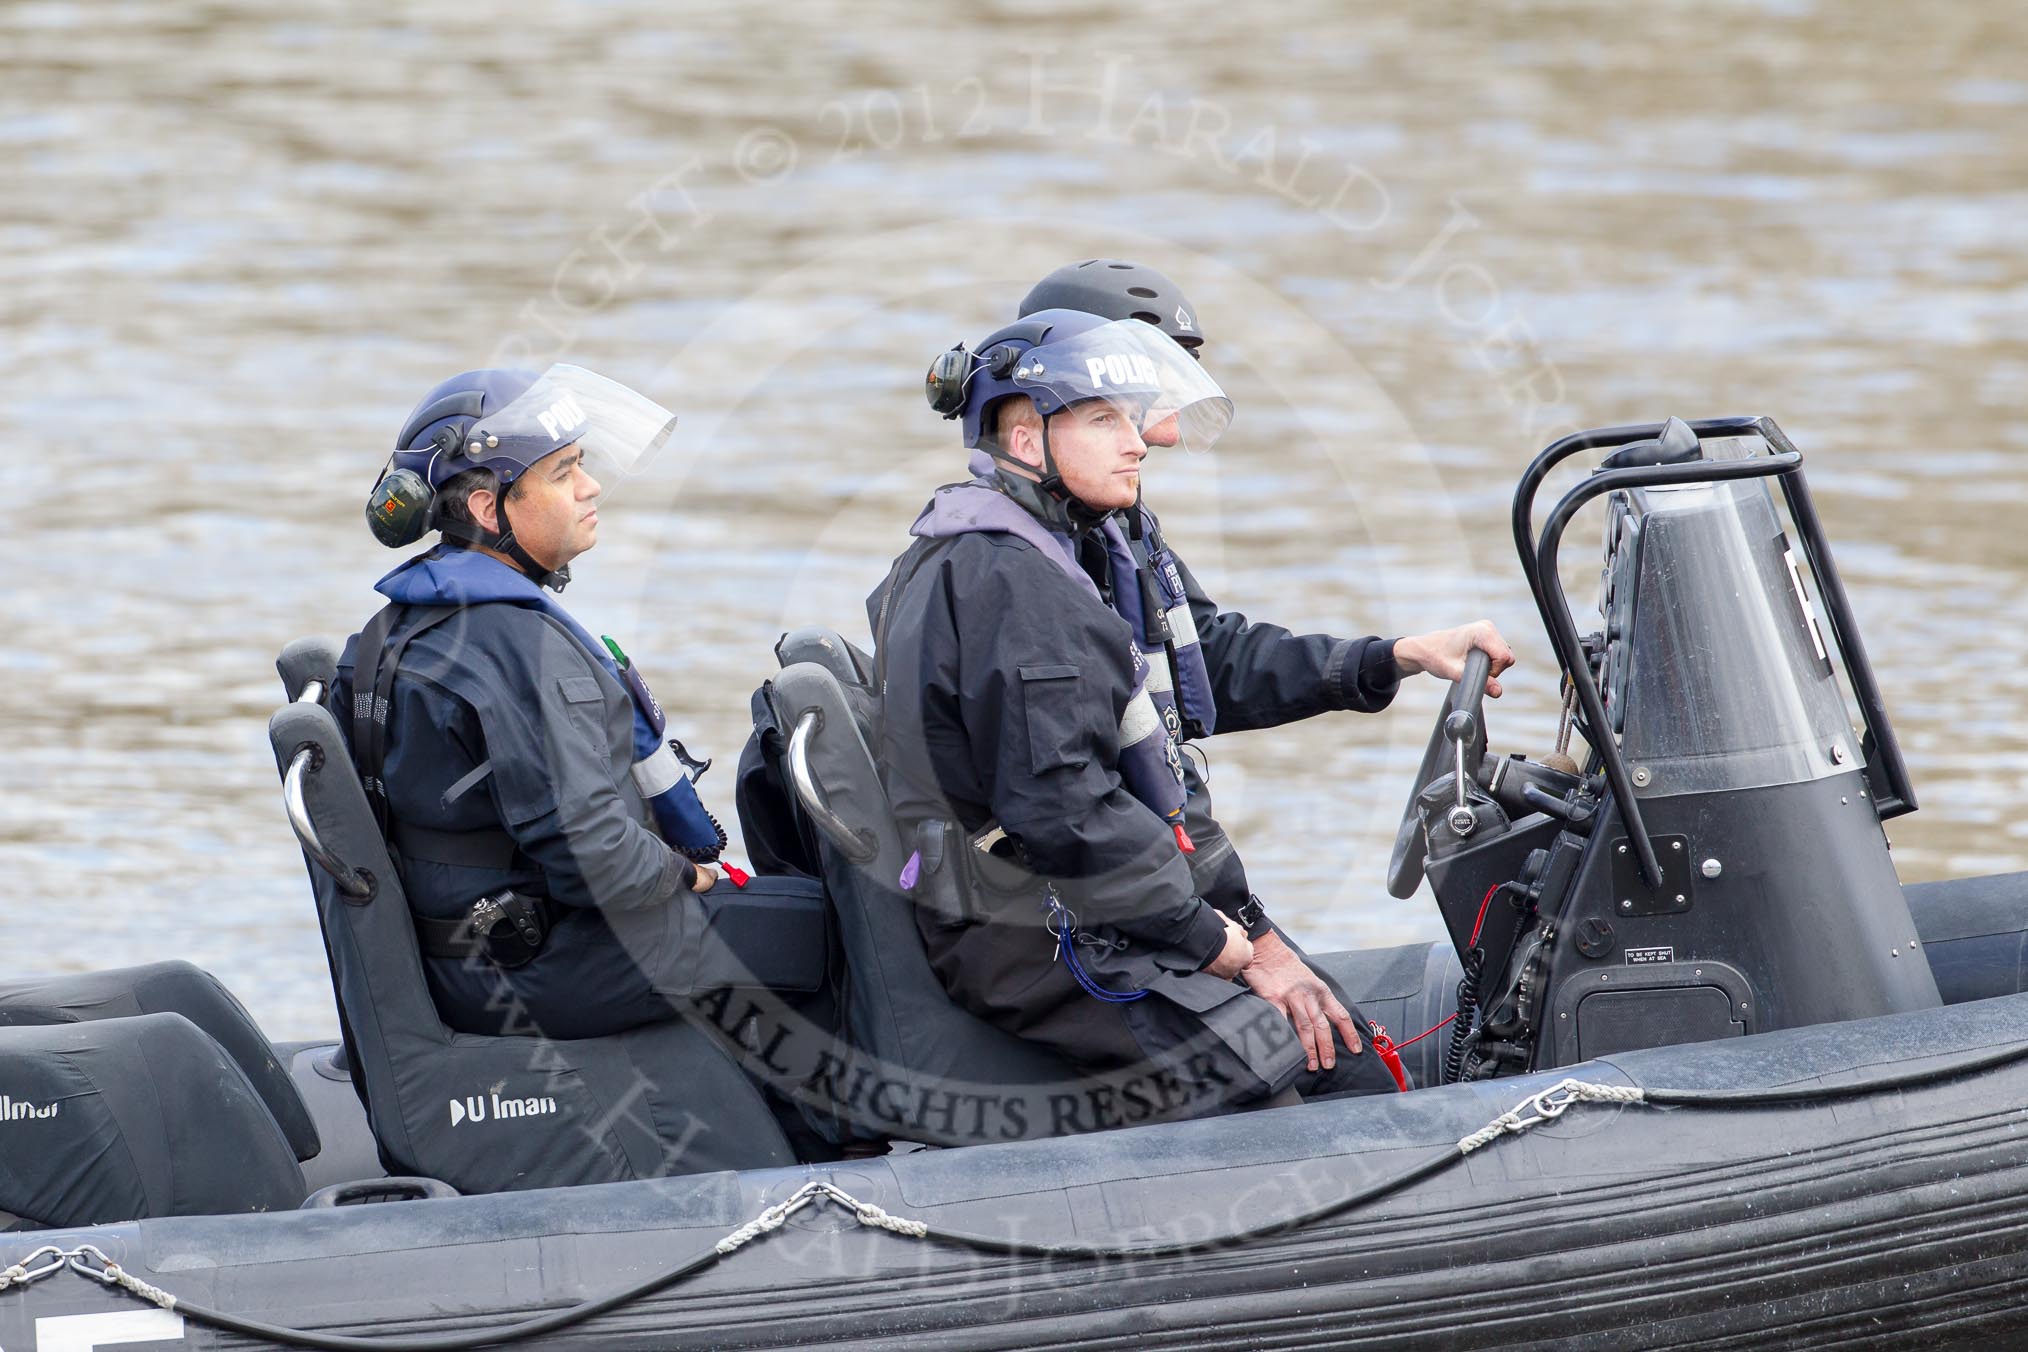 The Boat Race 2012: Setting the scene for the 2012 Boat Race: Officers of the London Metropolitan Police Marine Policing Unit (MPU) patrolling the Thames..




on 07 April 2012 at 12:40, image #56